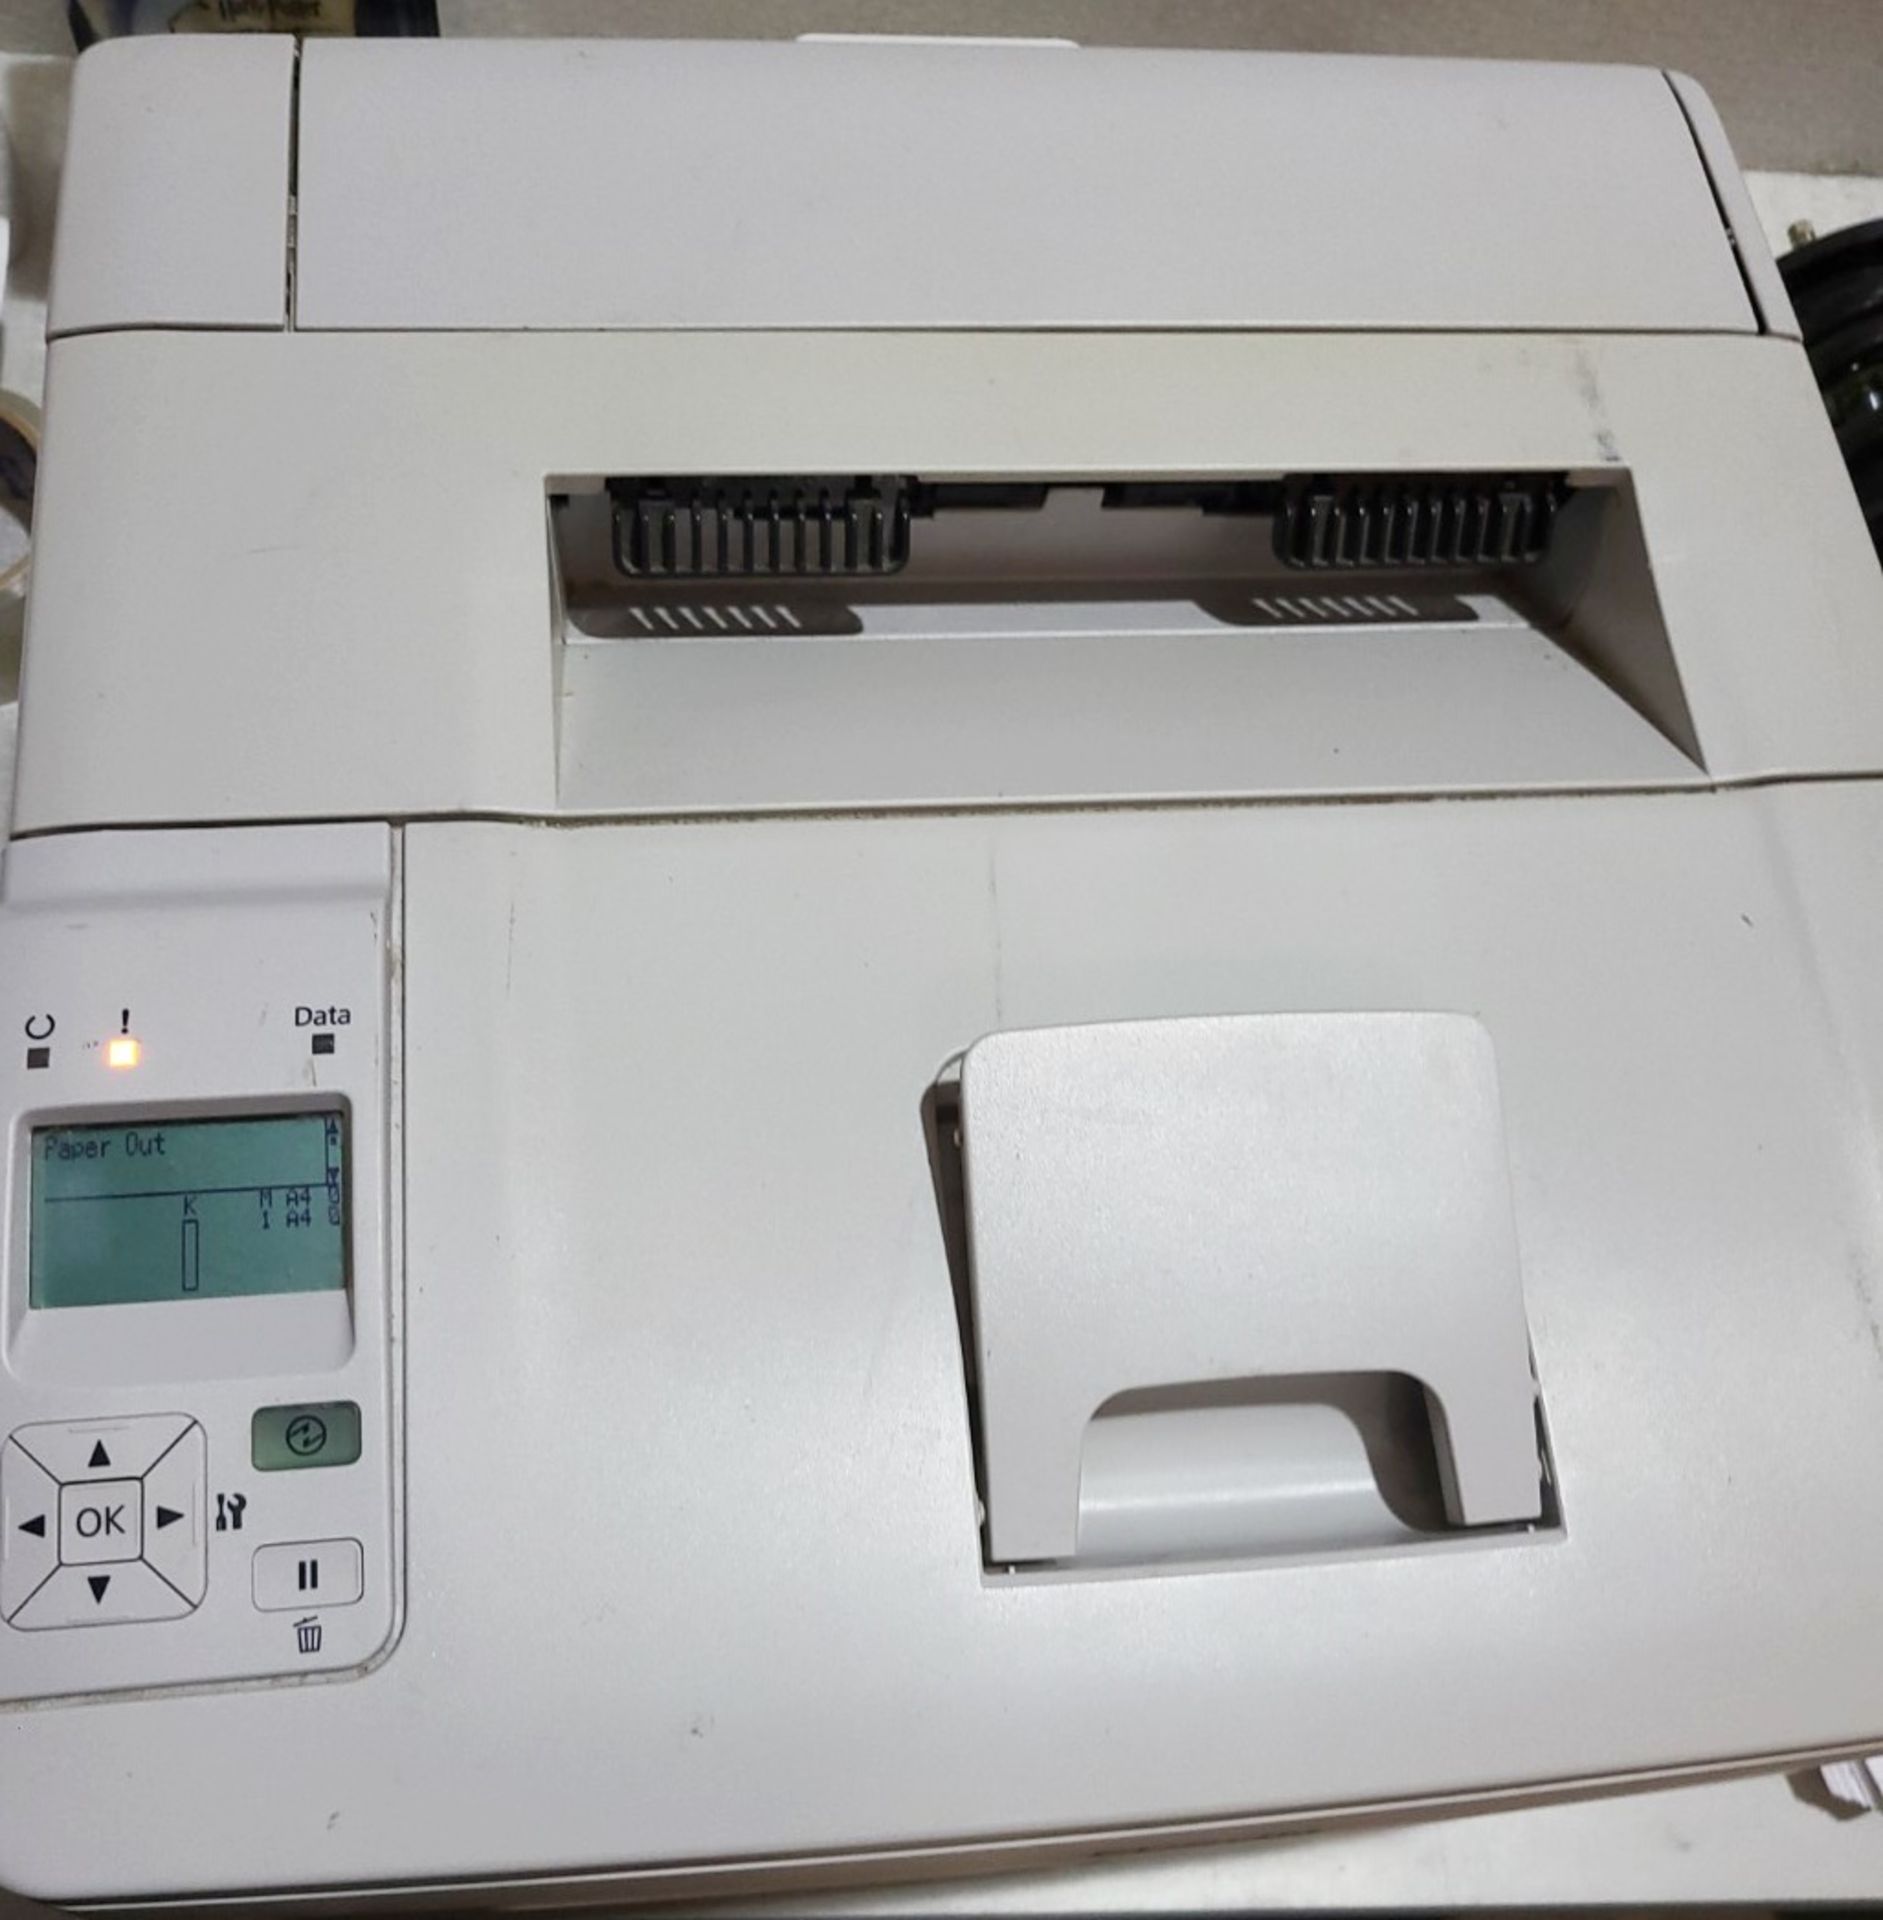 1 x Brother Printer MFC -9140CDN A4 Colour Multifunction Printer/Scanner/Copy/Fax Machine - Image 4 of 7